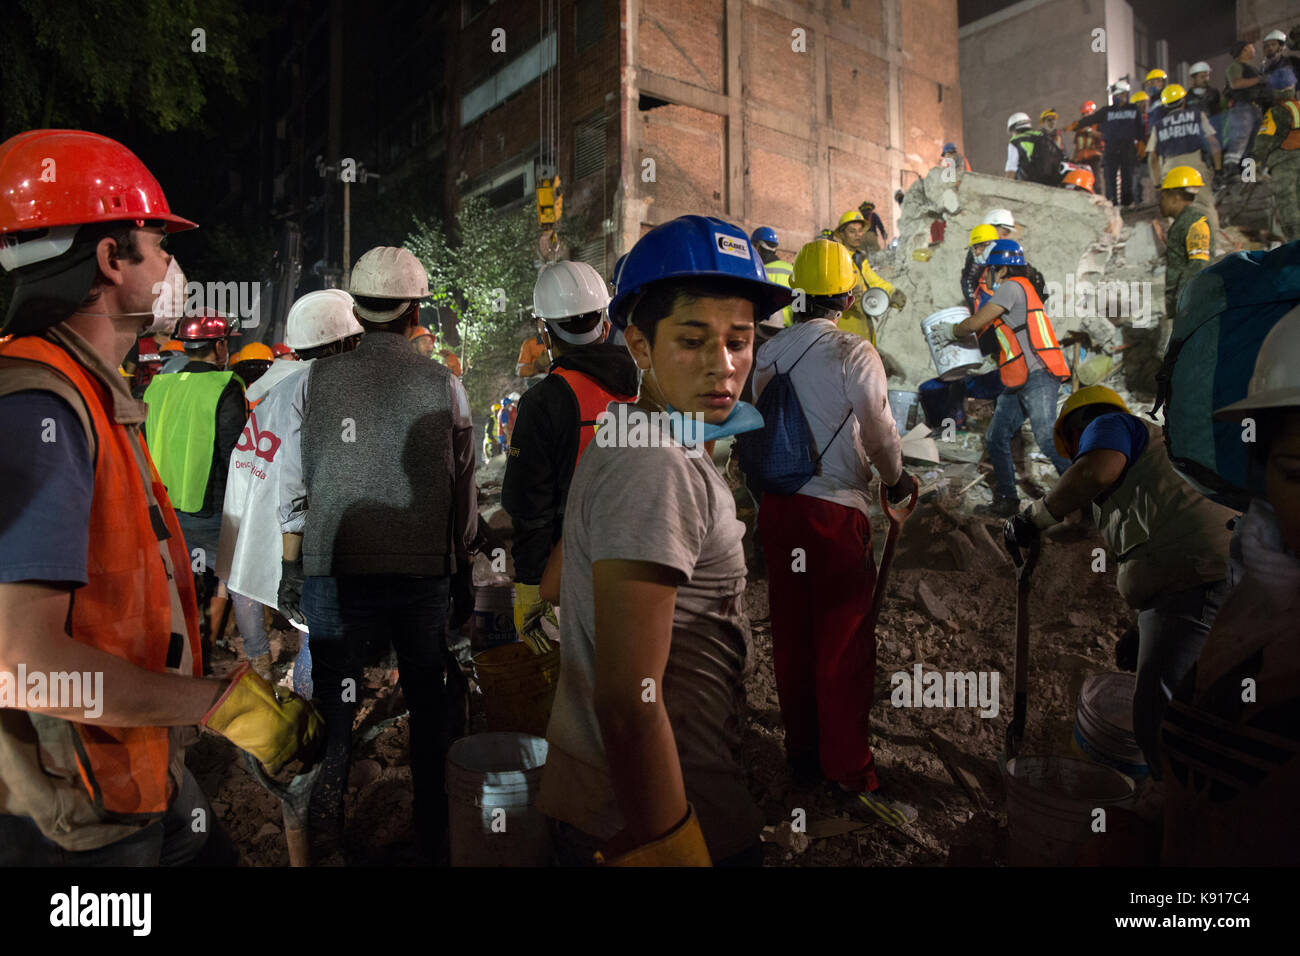 Mexico City, Mexico. 21st Sep, 2017. Volunteers and rescue workers remove rubble and search for survivors feared trapped in a collapsed building, two days after a devastating earthquake, on Amsterdam Avenue in the Condesa neighborhood, in Mexico City, Mexico on September 21, 2017. On September 19, 2017, a 7.1 magnitude earthquake rocked Central Mexico, killing more than 200 hundreds people and causing serious damage to buildings in the capital. The worst earthquake in the history of Mexico occurred on September 19, 1985, killing nearly 10,000 people. Credit: Benedicte Desrus/Alamy Live News Stock Photo